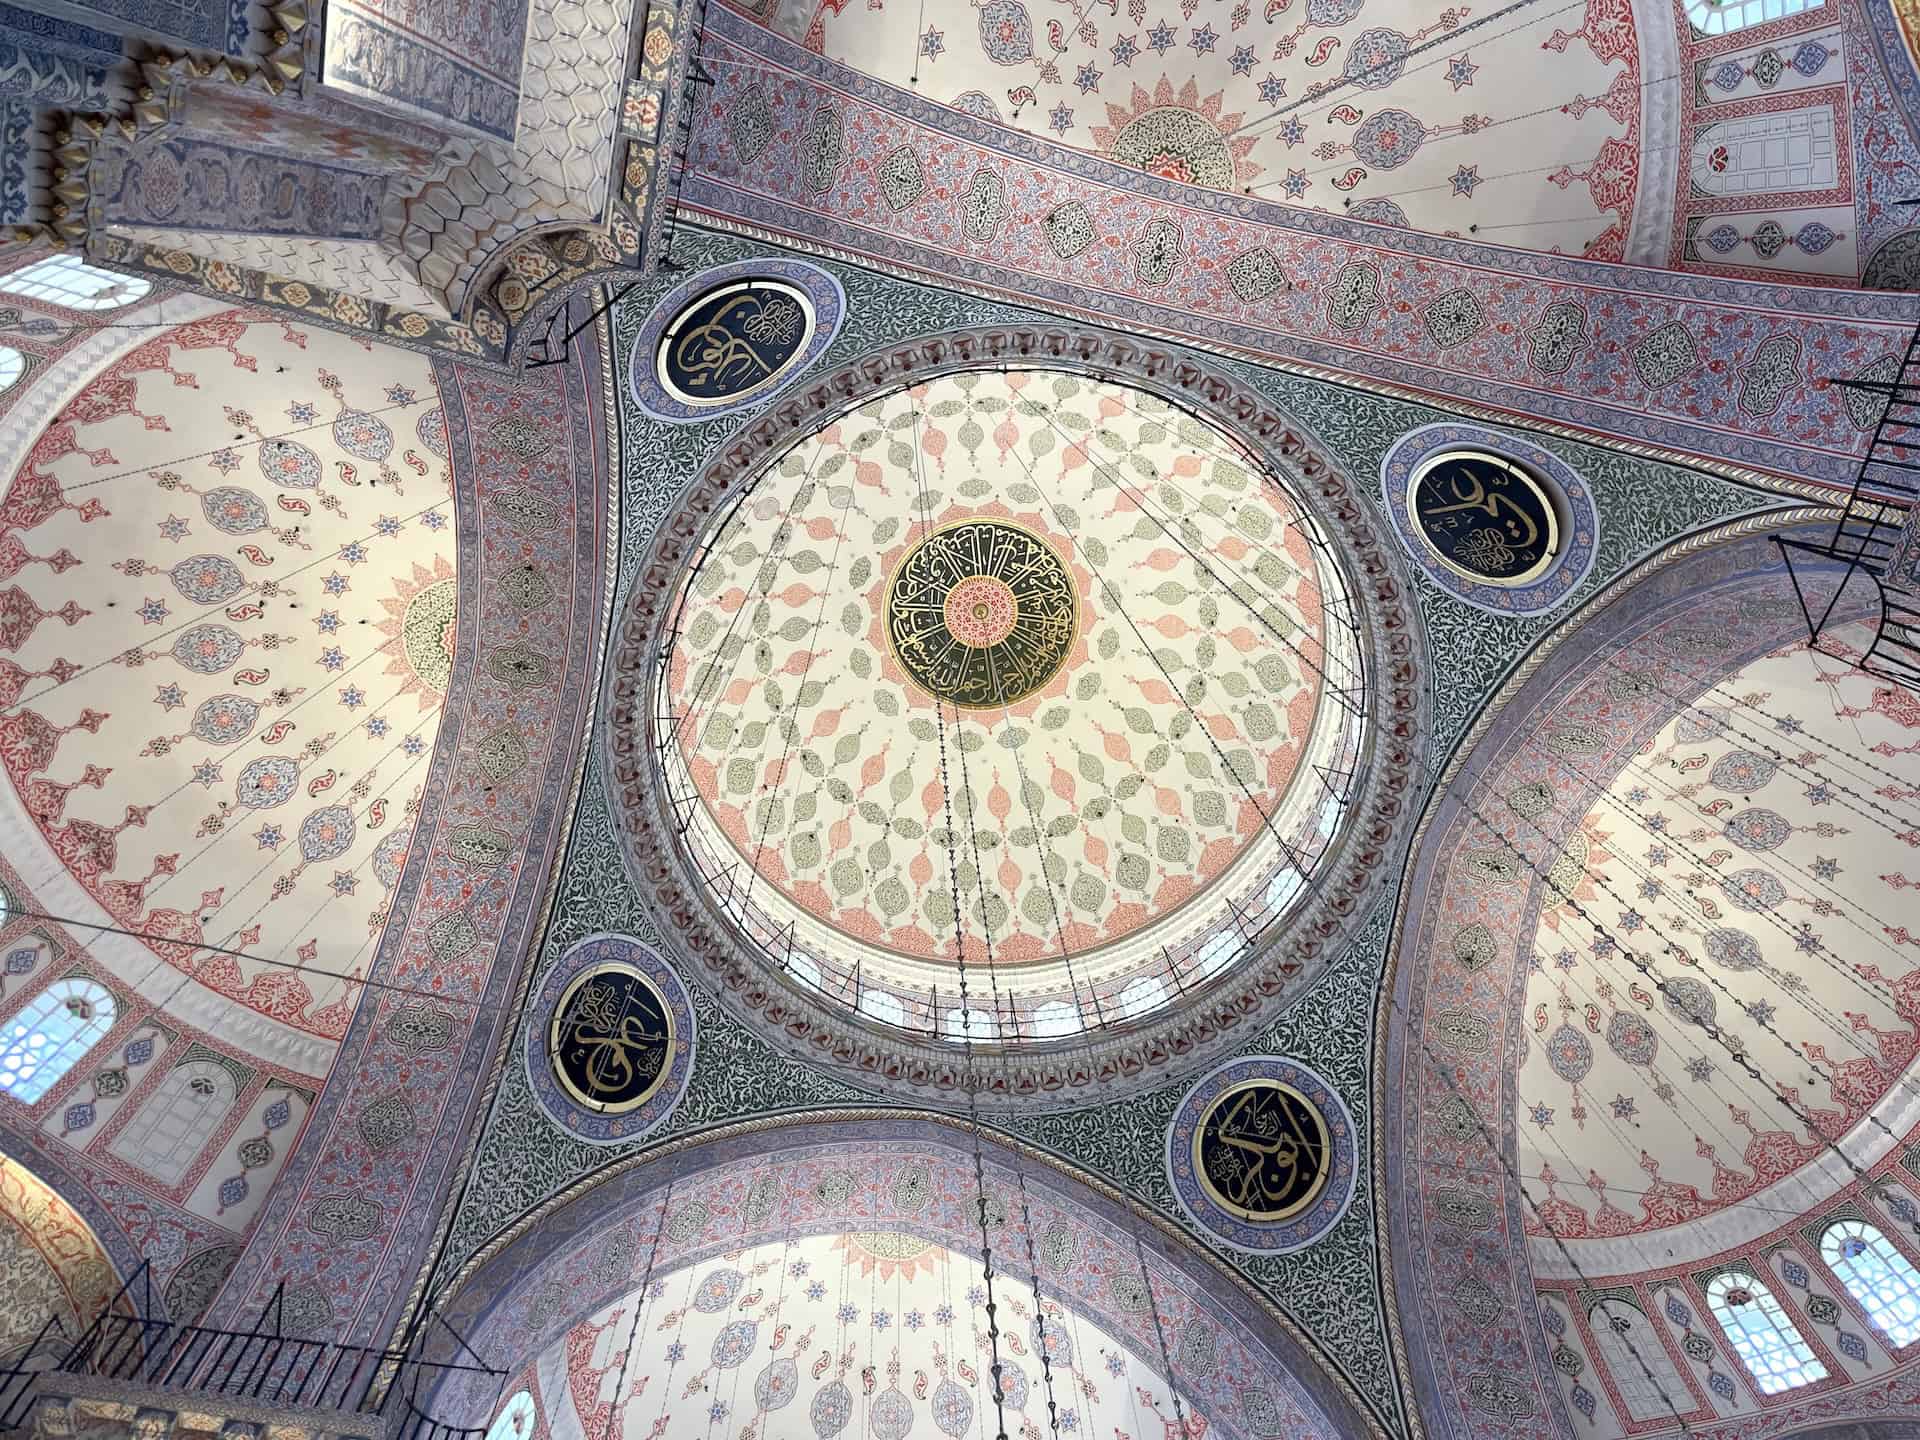 Central dome of the New Mosque in Istanbul, Turkey